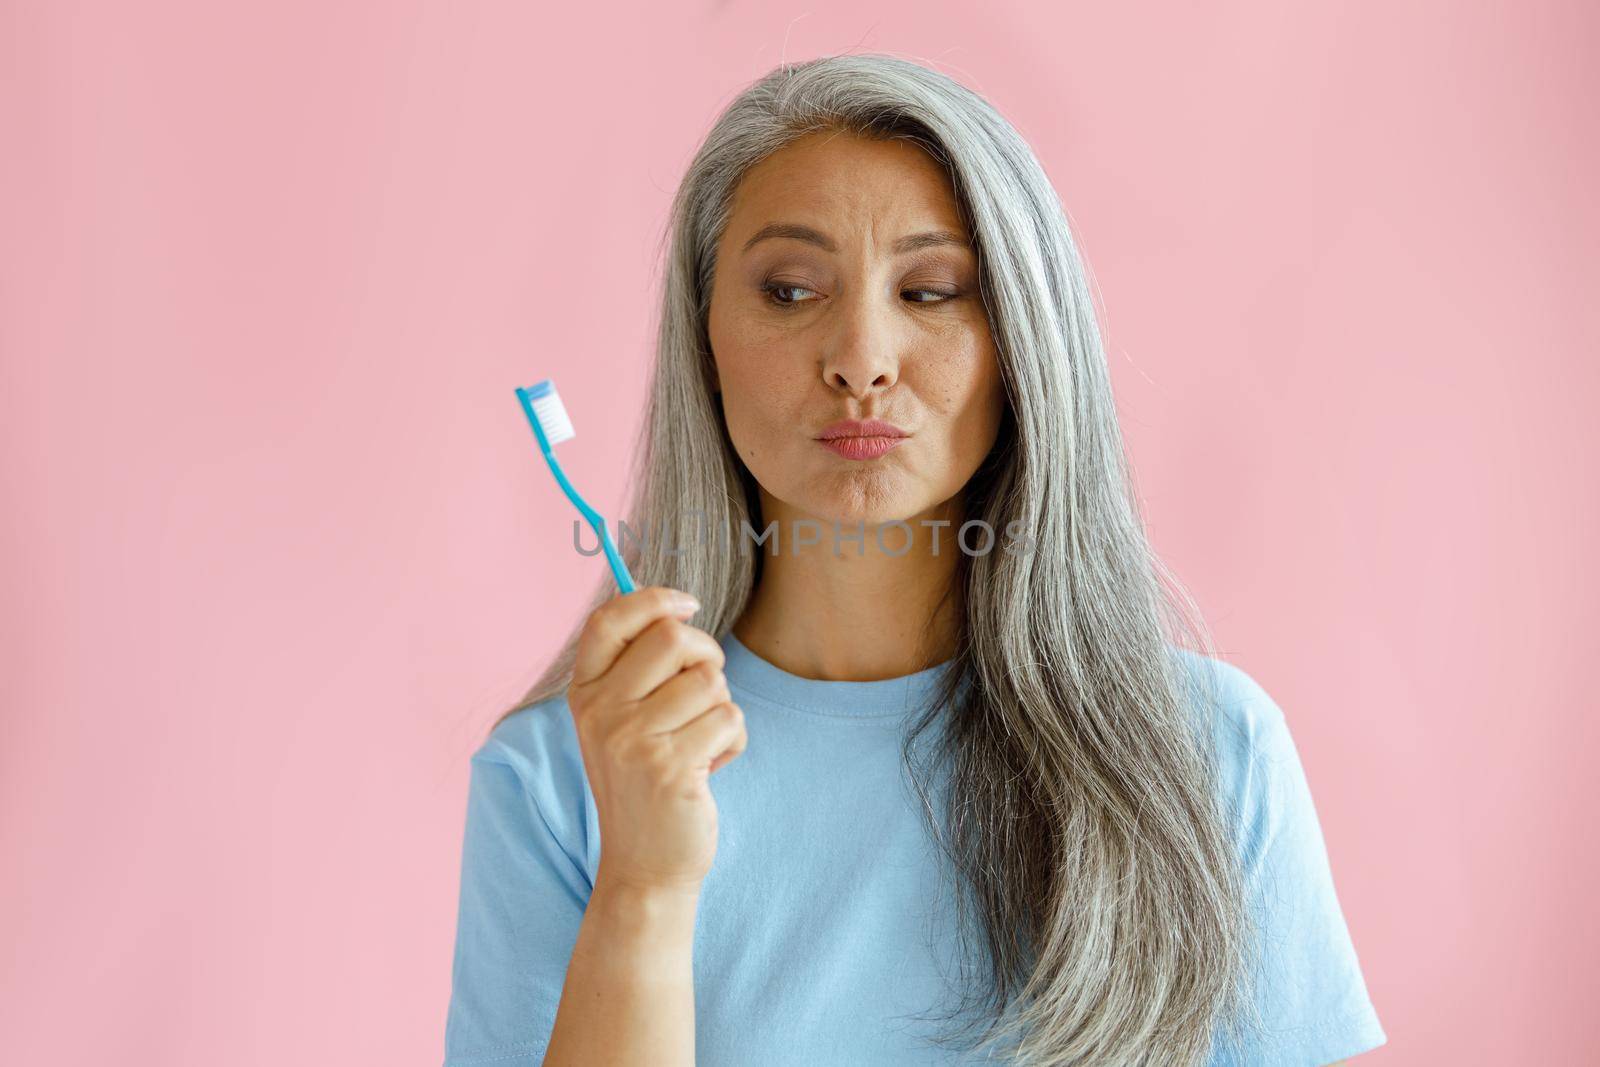 Doubting mature Asian lady in blue t-shirt looks at toothbrush on pink background by Yaroslav_astakhov